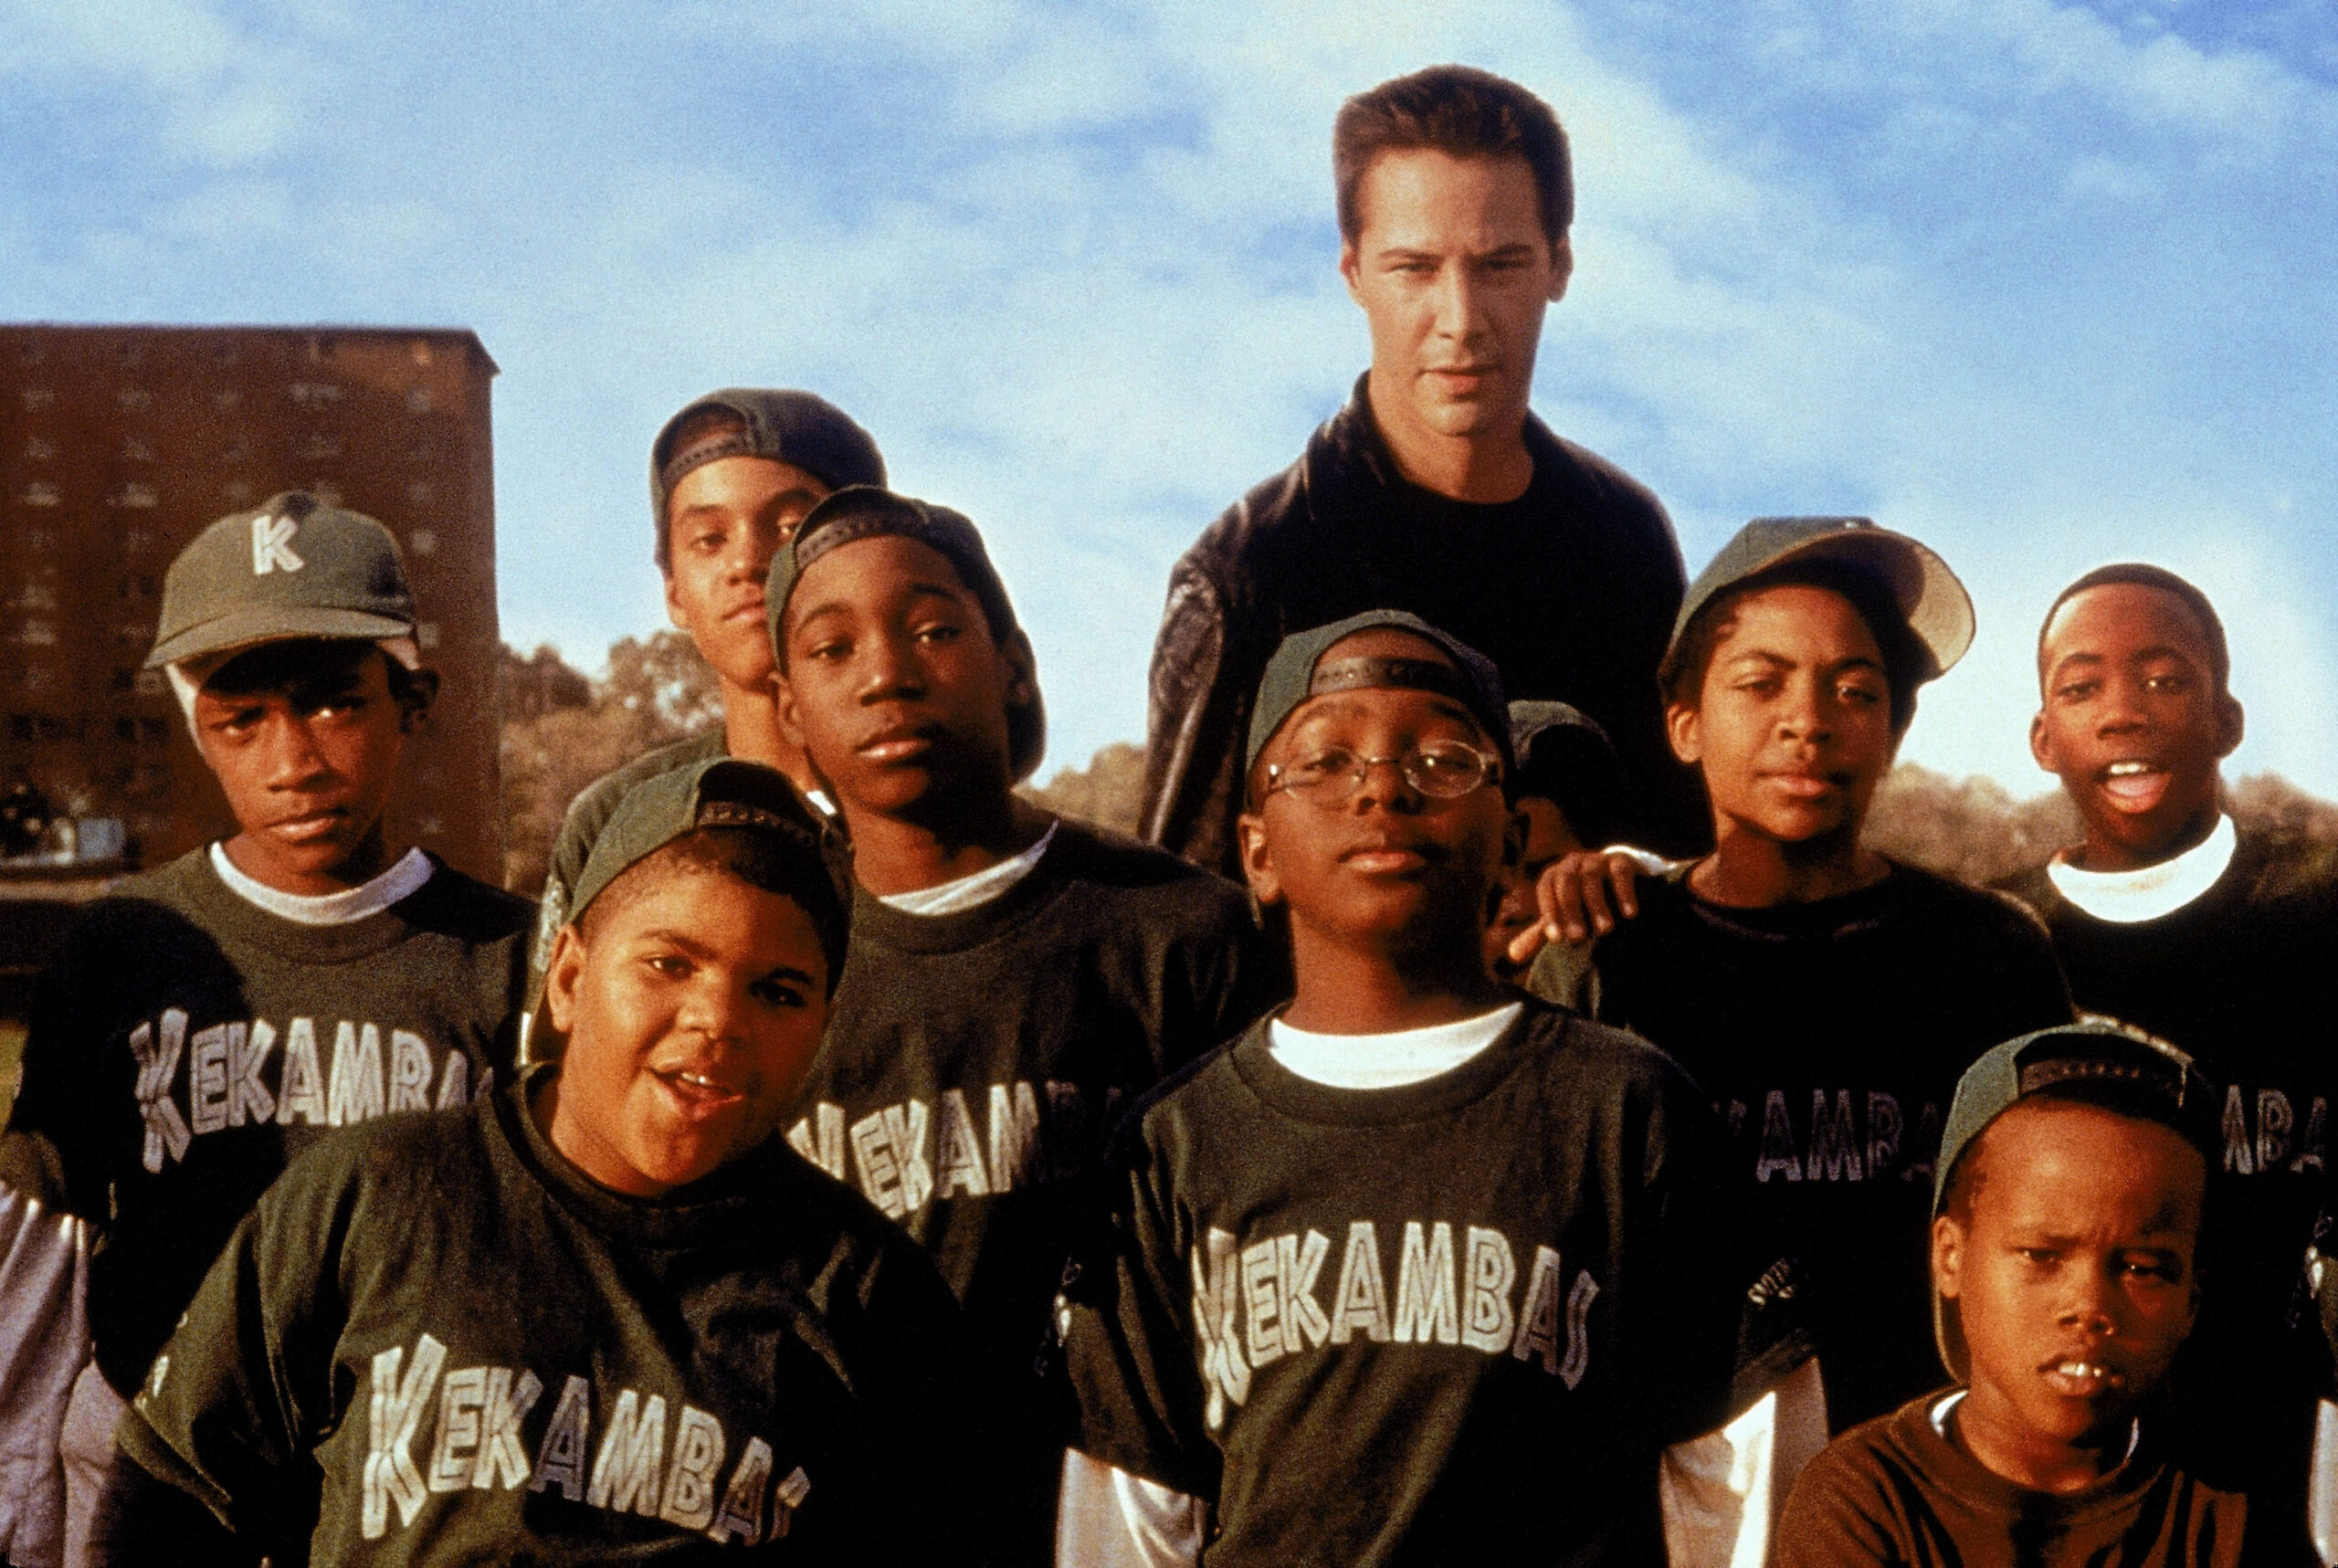 Real vs Reel: The True Story Behind Keanu Reeves' 'Hardball' and Its Impact on Sports Drama Fans"